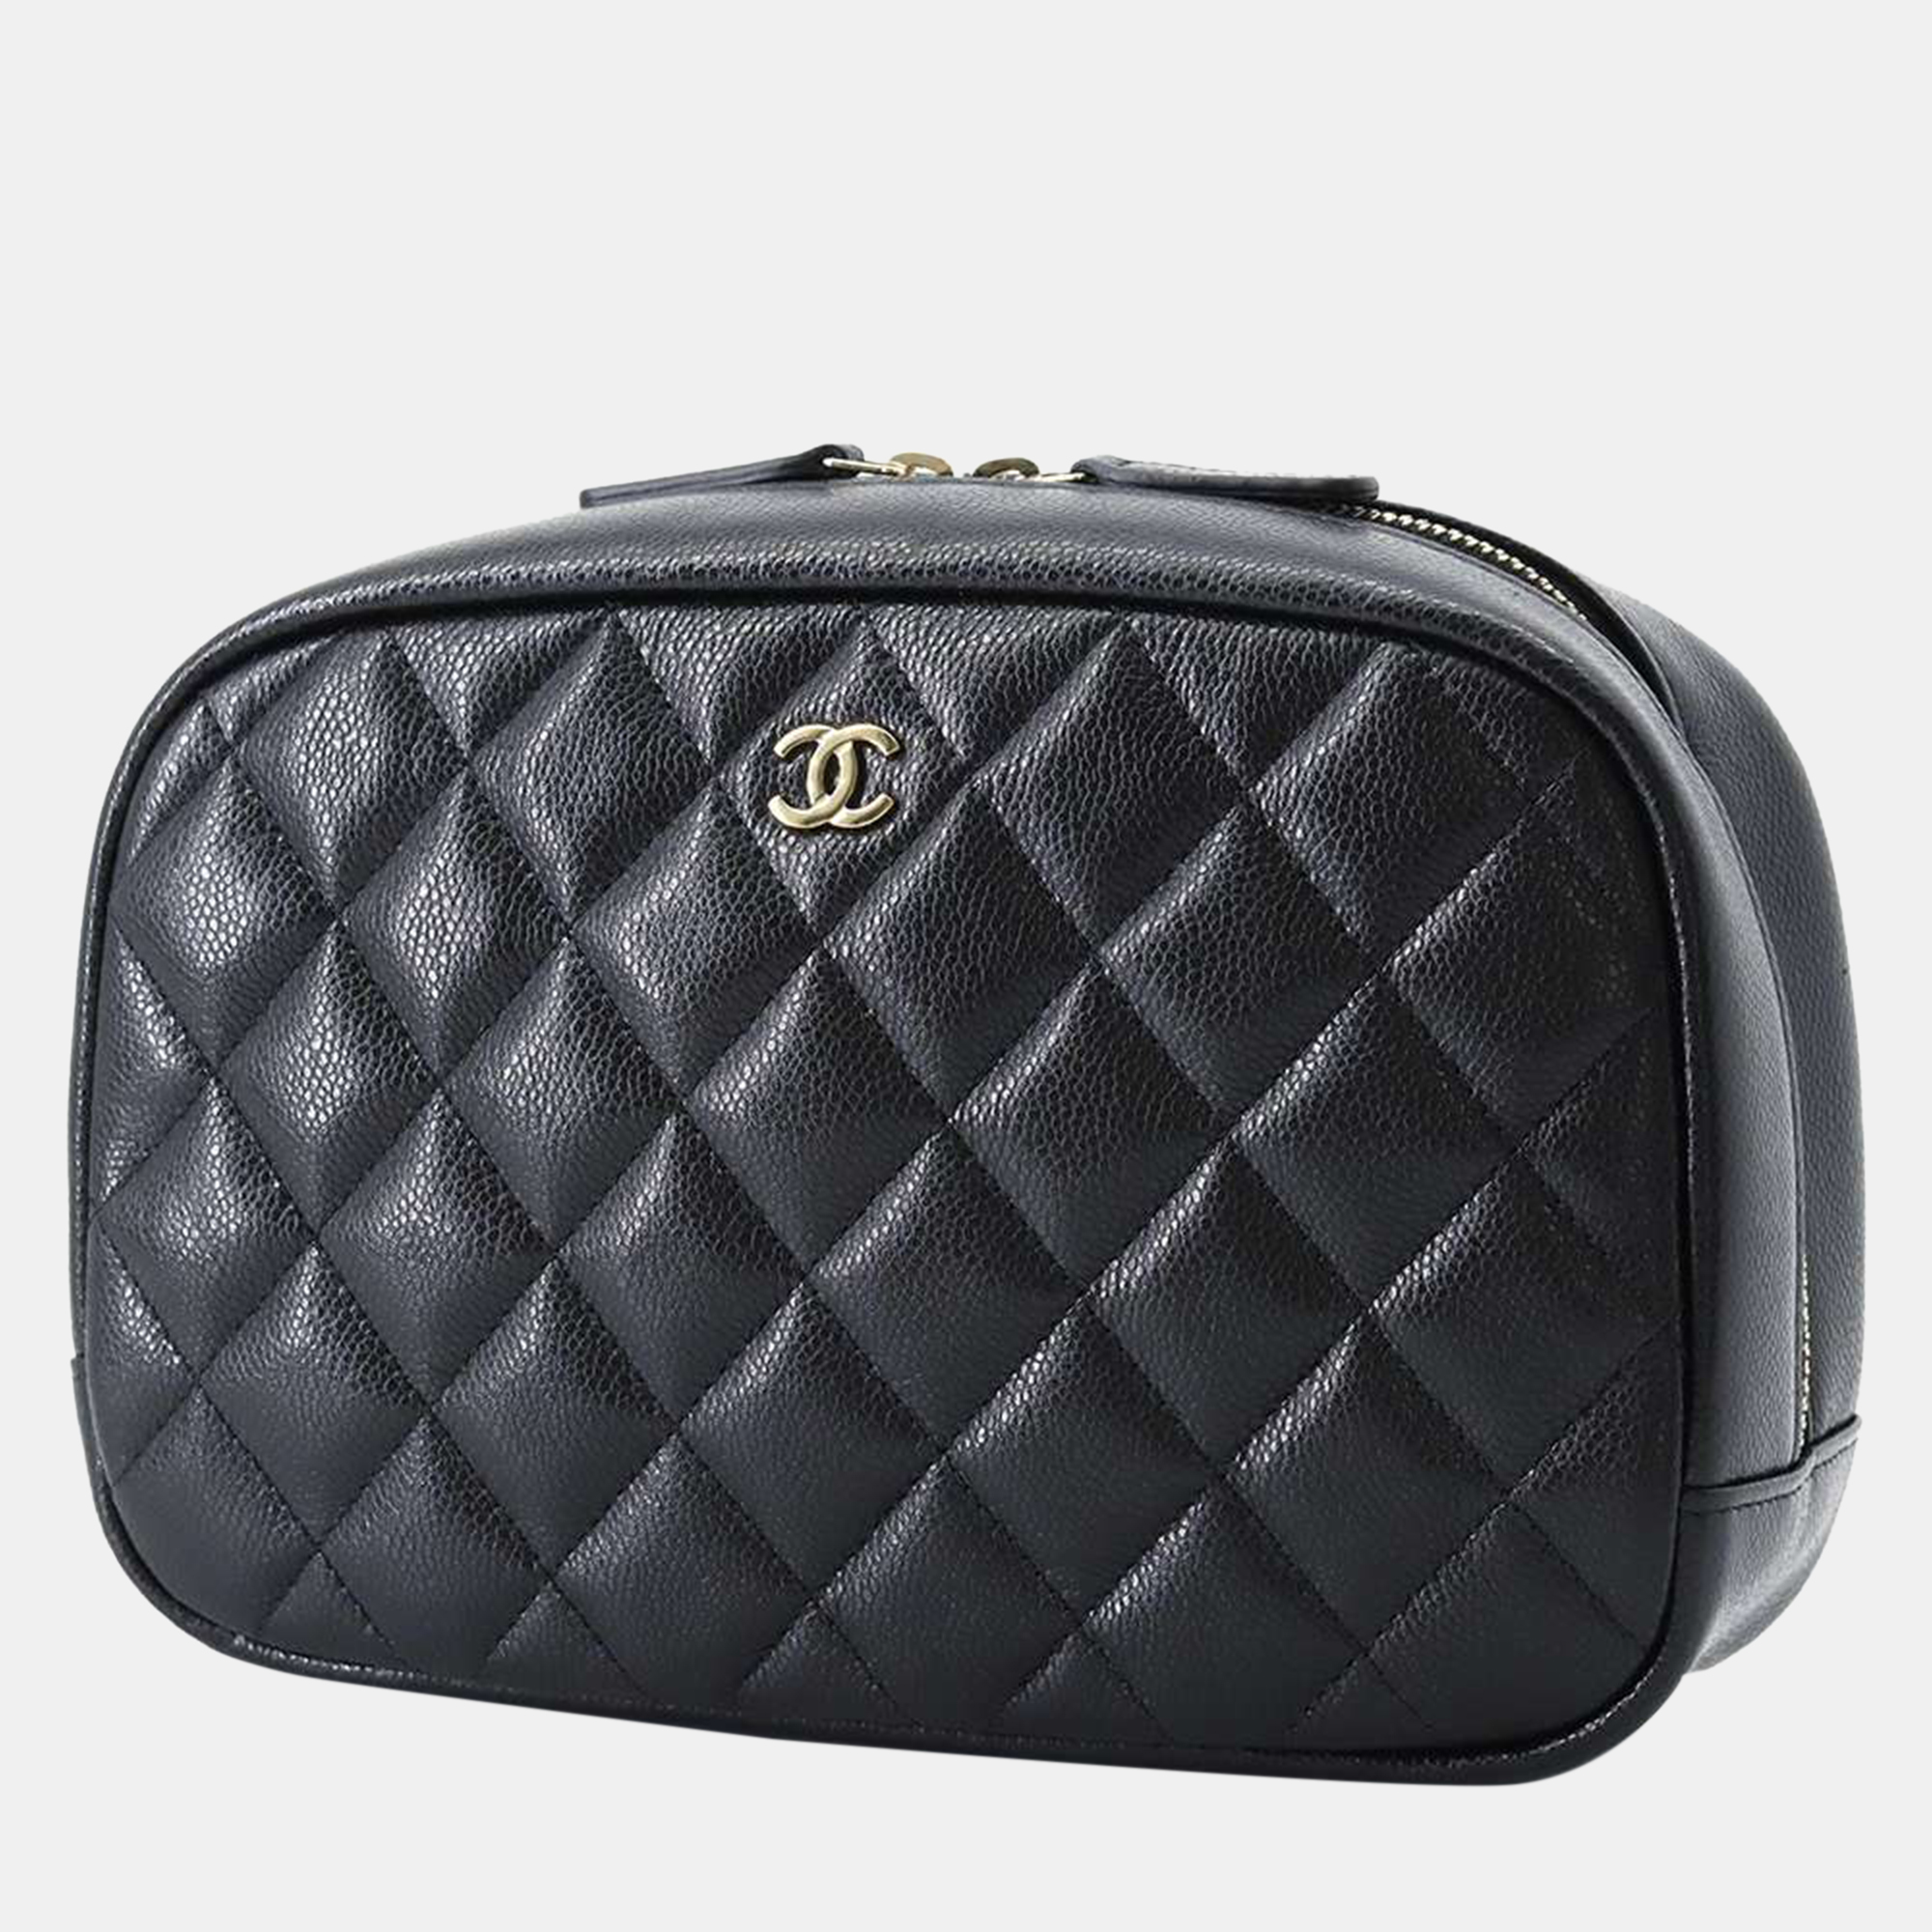 Pre-owned Chanel Black Caviar Leather Classic Cosmetic Pouch